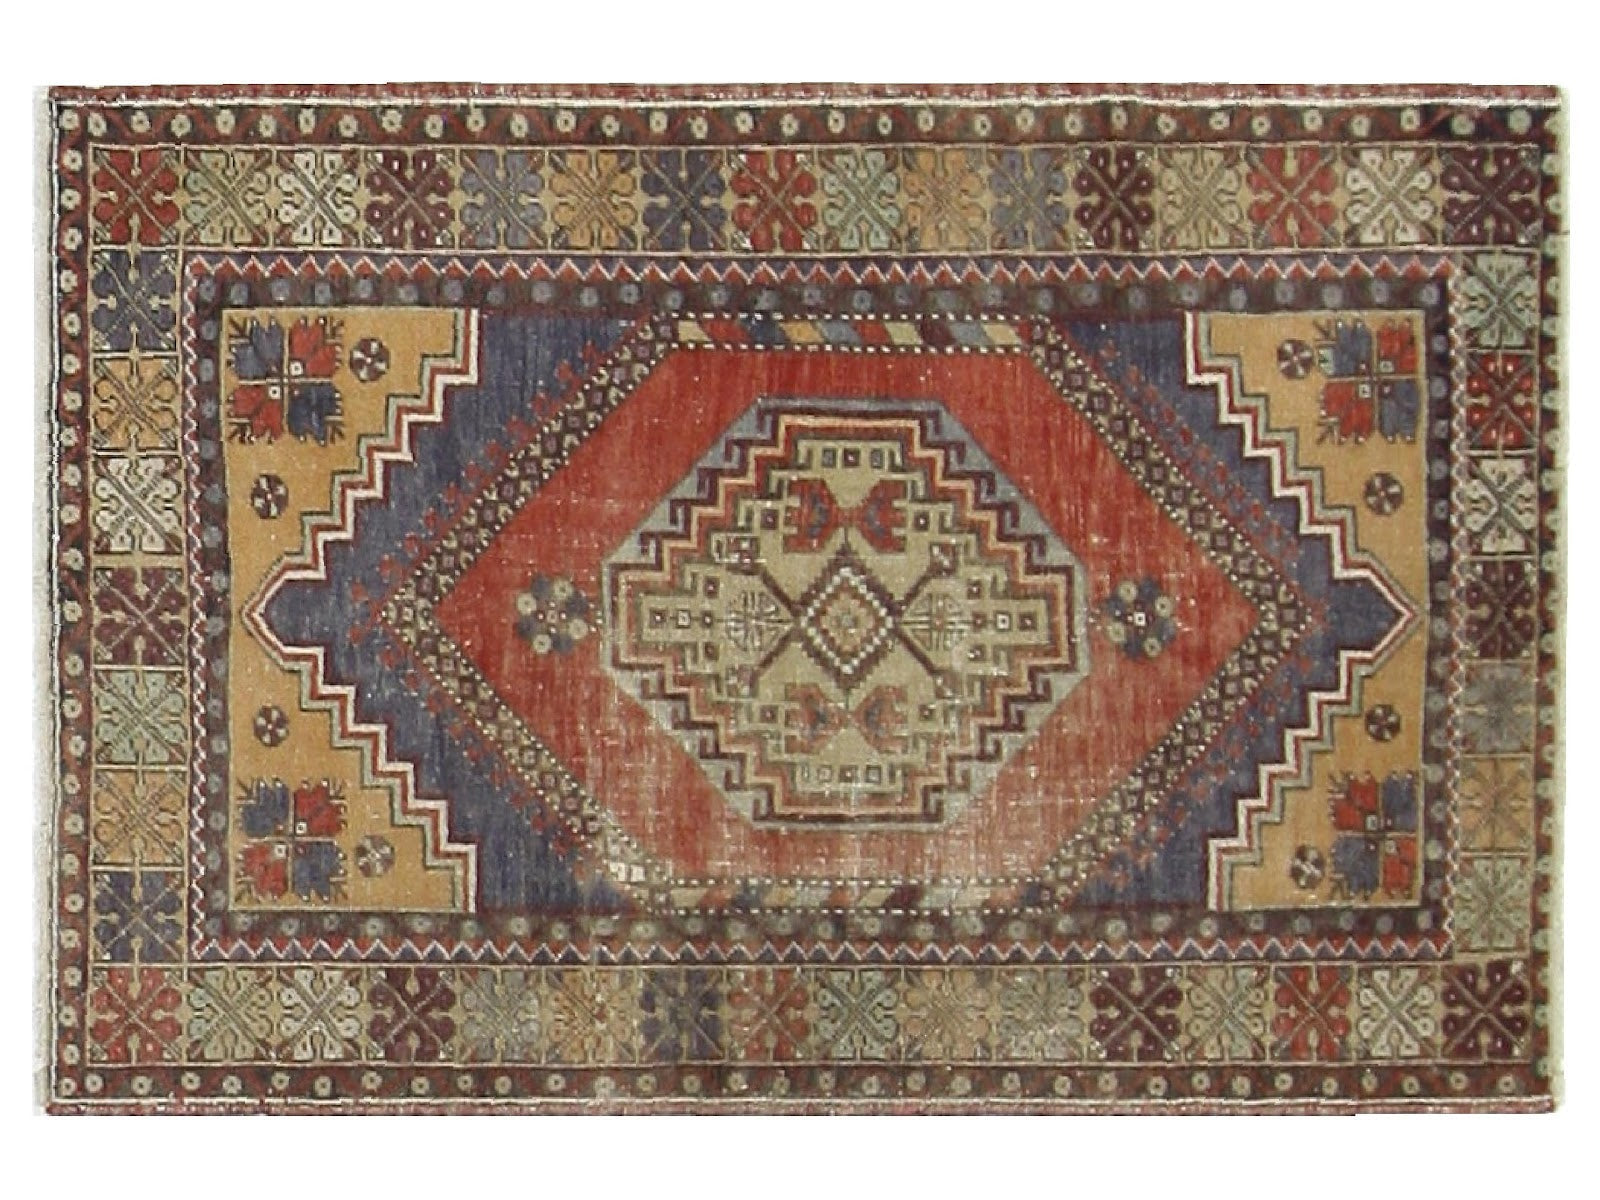 4x6 Anatolian rug with tribal geometric designs, featuring an orange backdrop and a multi-color border of blues, reds, and browns.